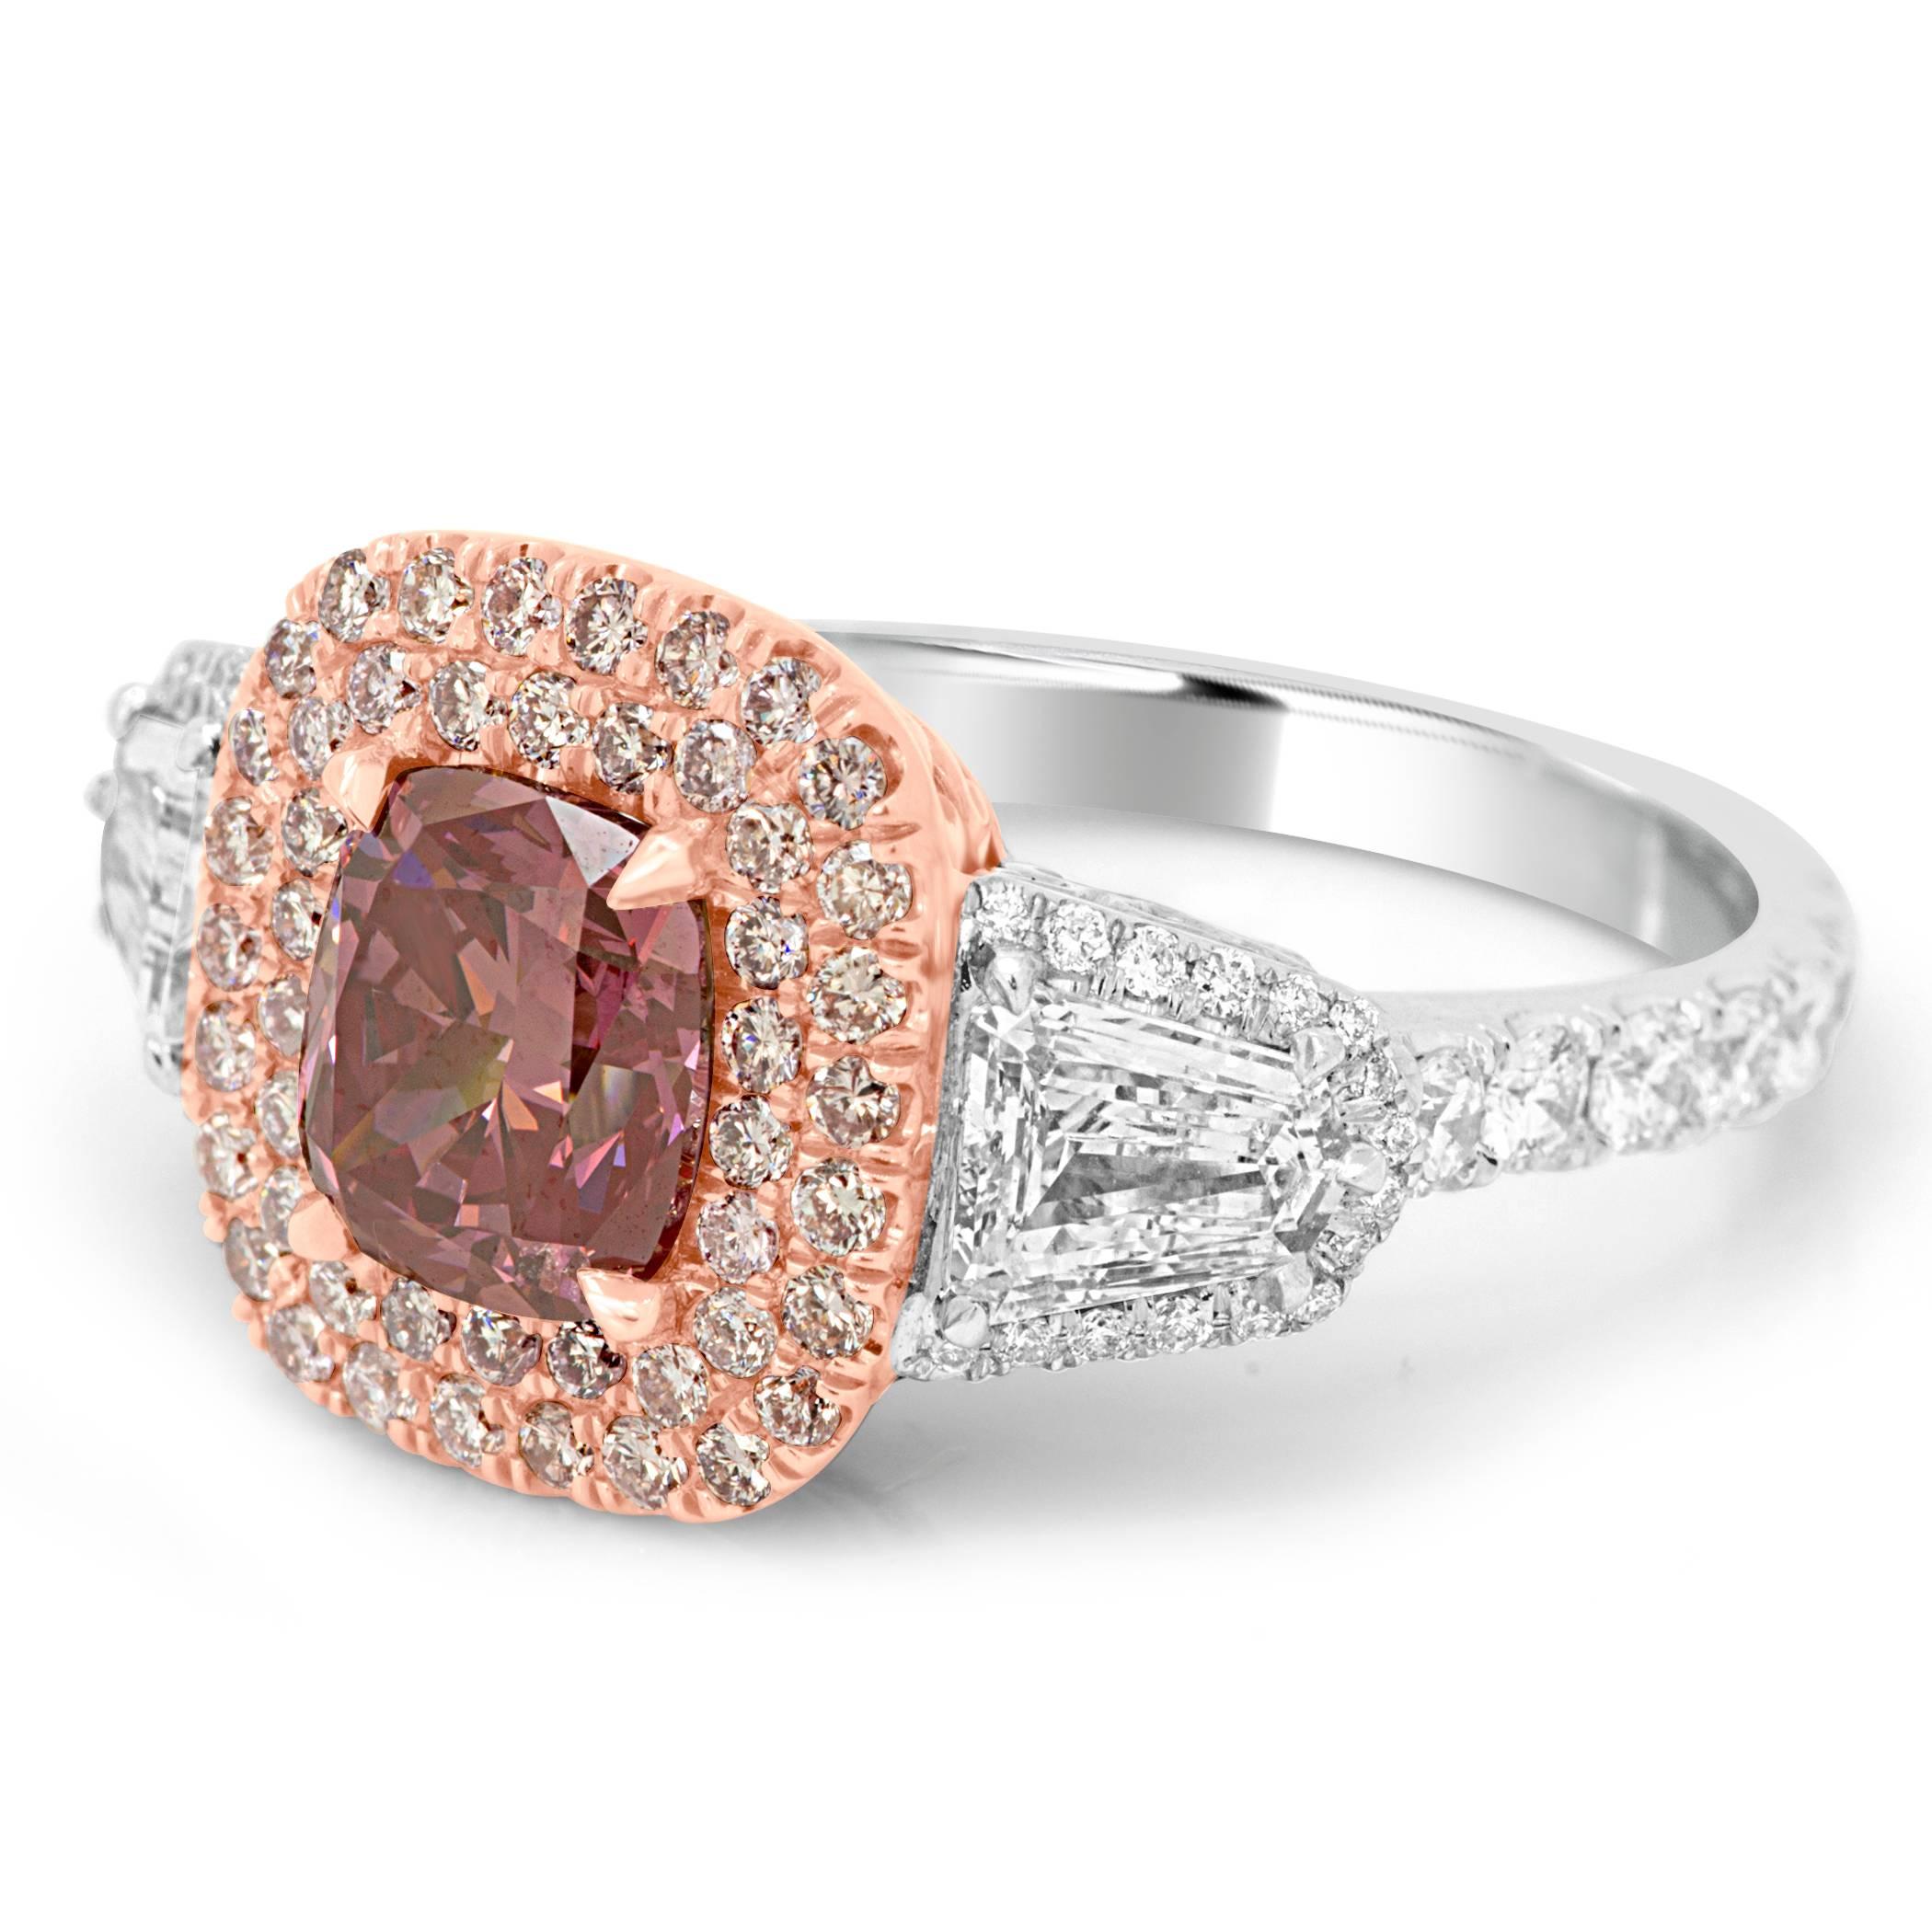 For The Collector, Extremely Rare One of a kind GIA Certified HPHT Fancy Vivid Purplish Pink VVS1 clarity Diamond 1.49 carat encircled in a double halo of natural pink diamond round 0.40 carat flanked by 2 White G-H Color VS-SI Clarity Diamond